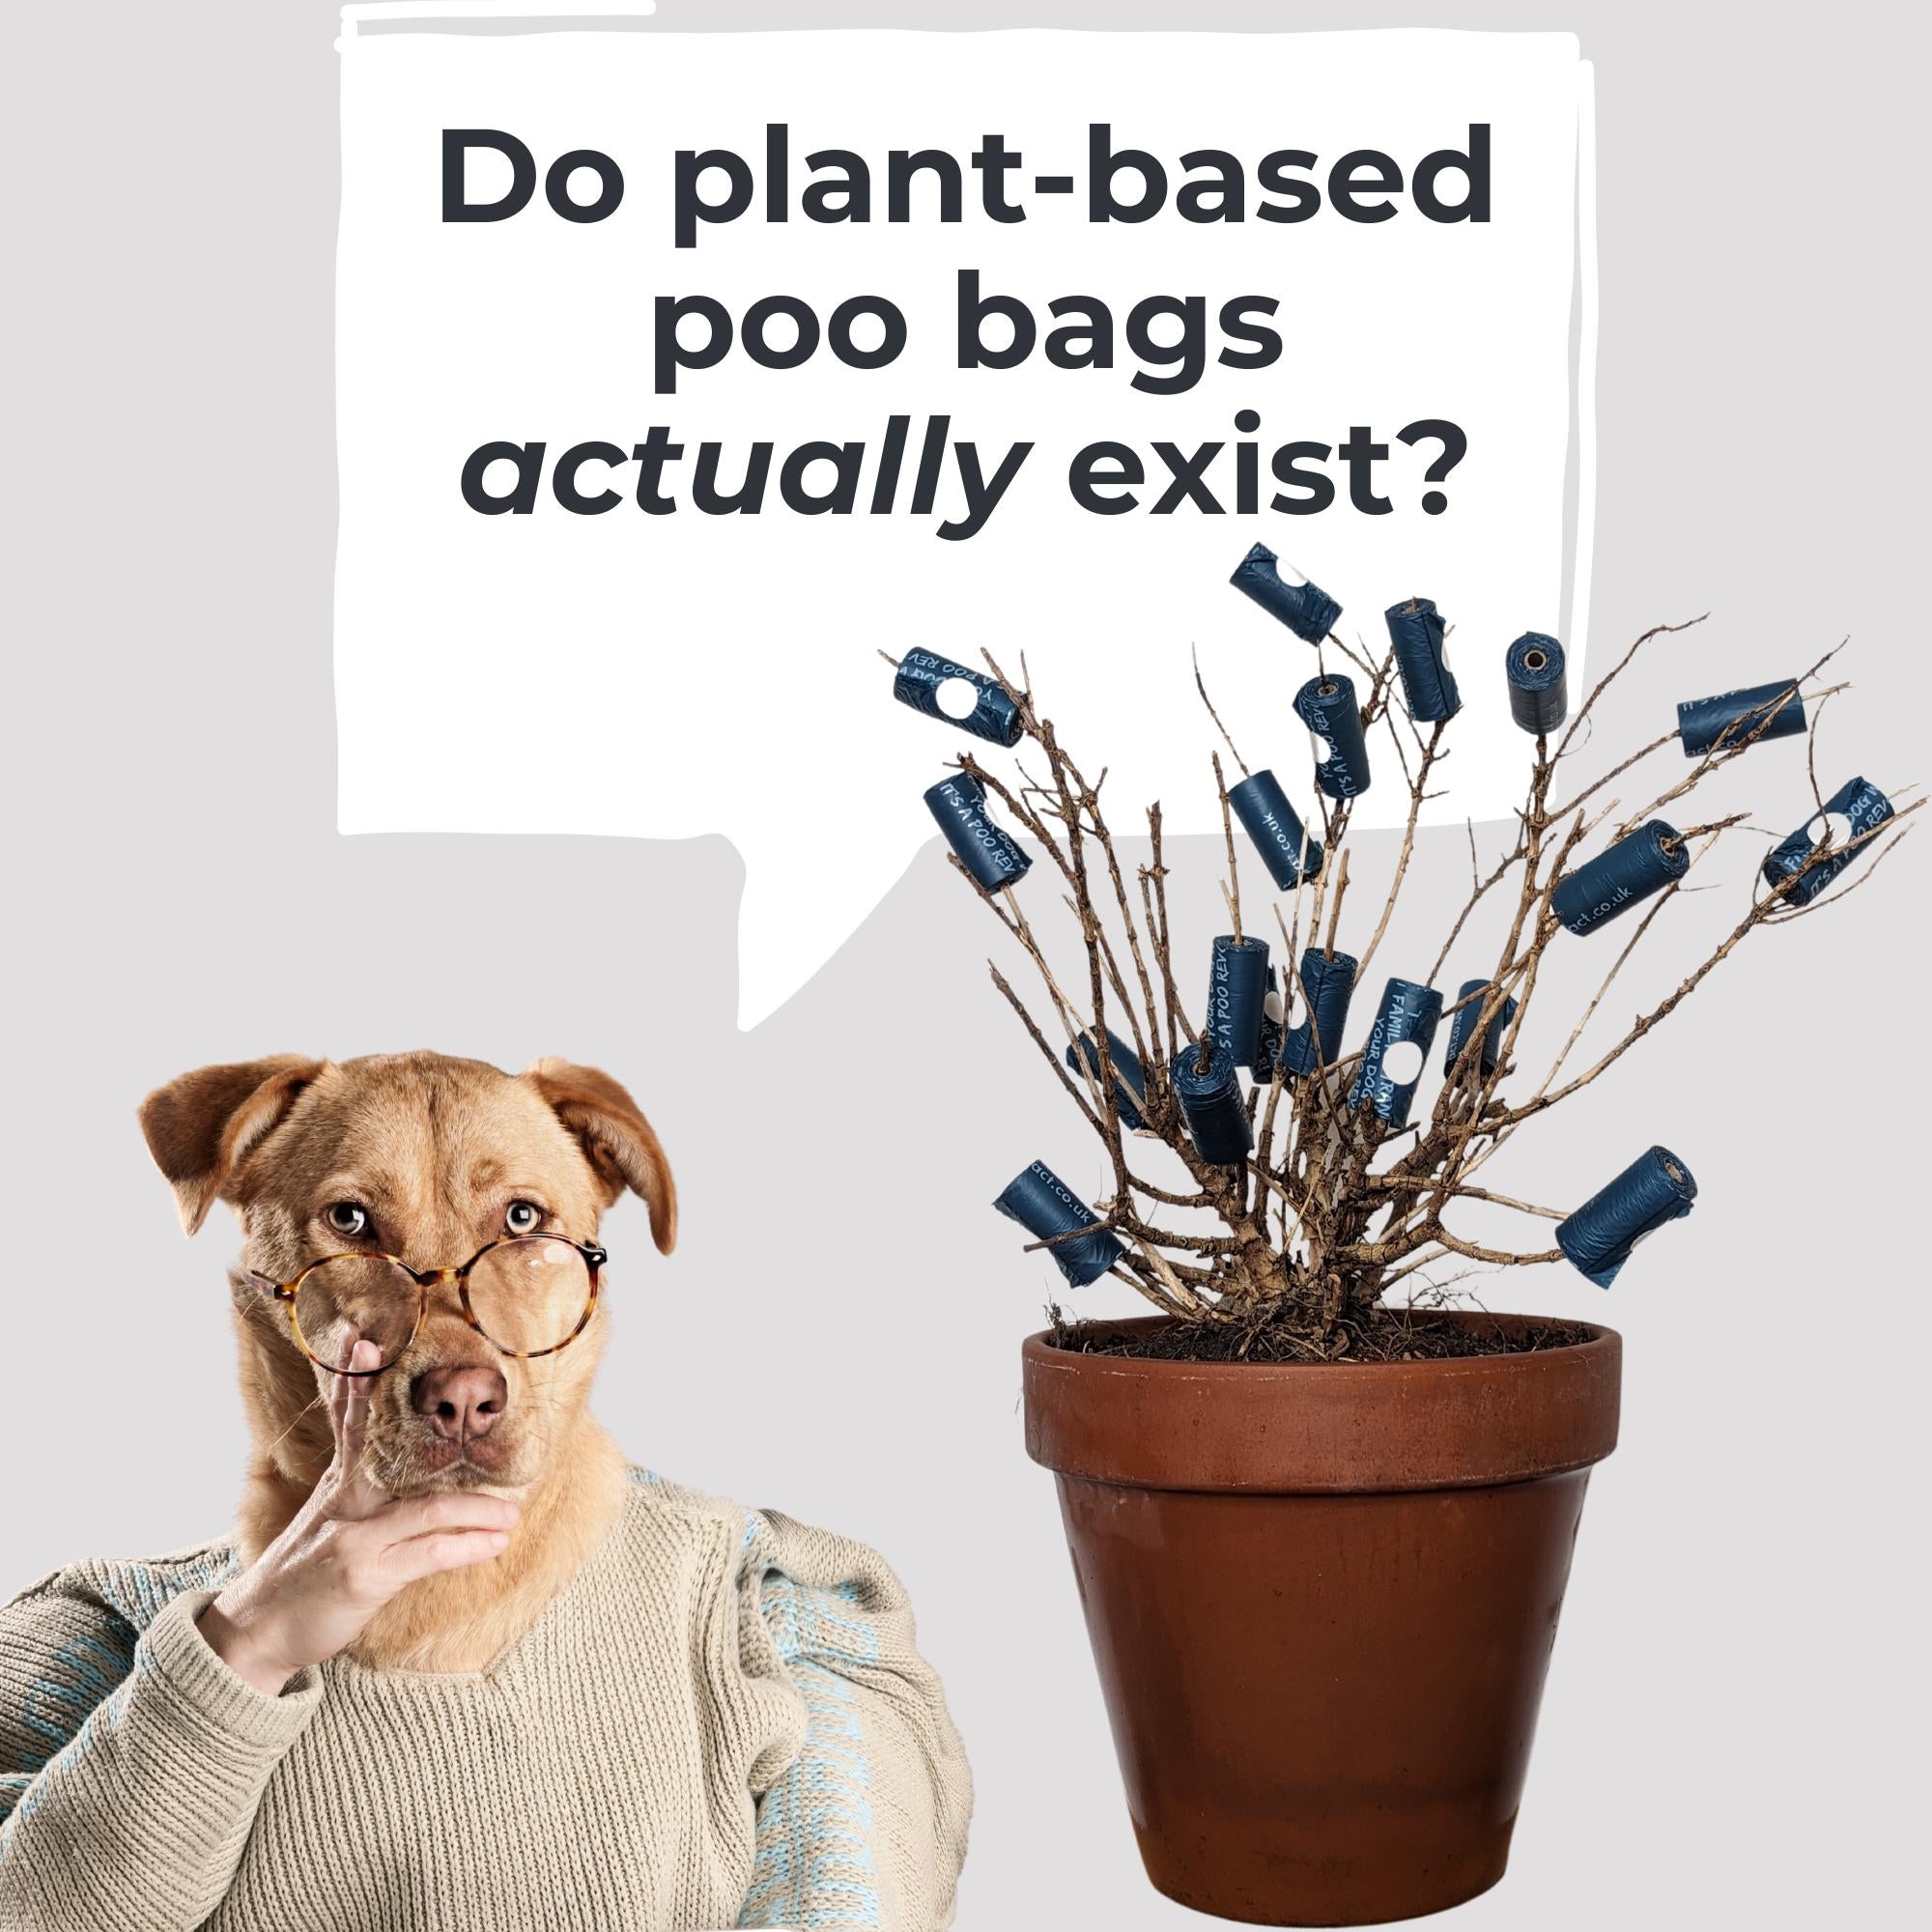 Do plant based poo bags actually exist?